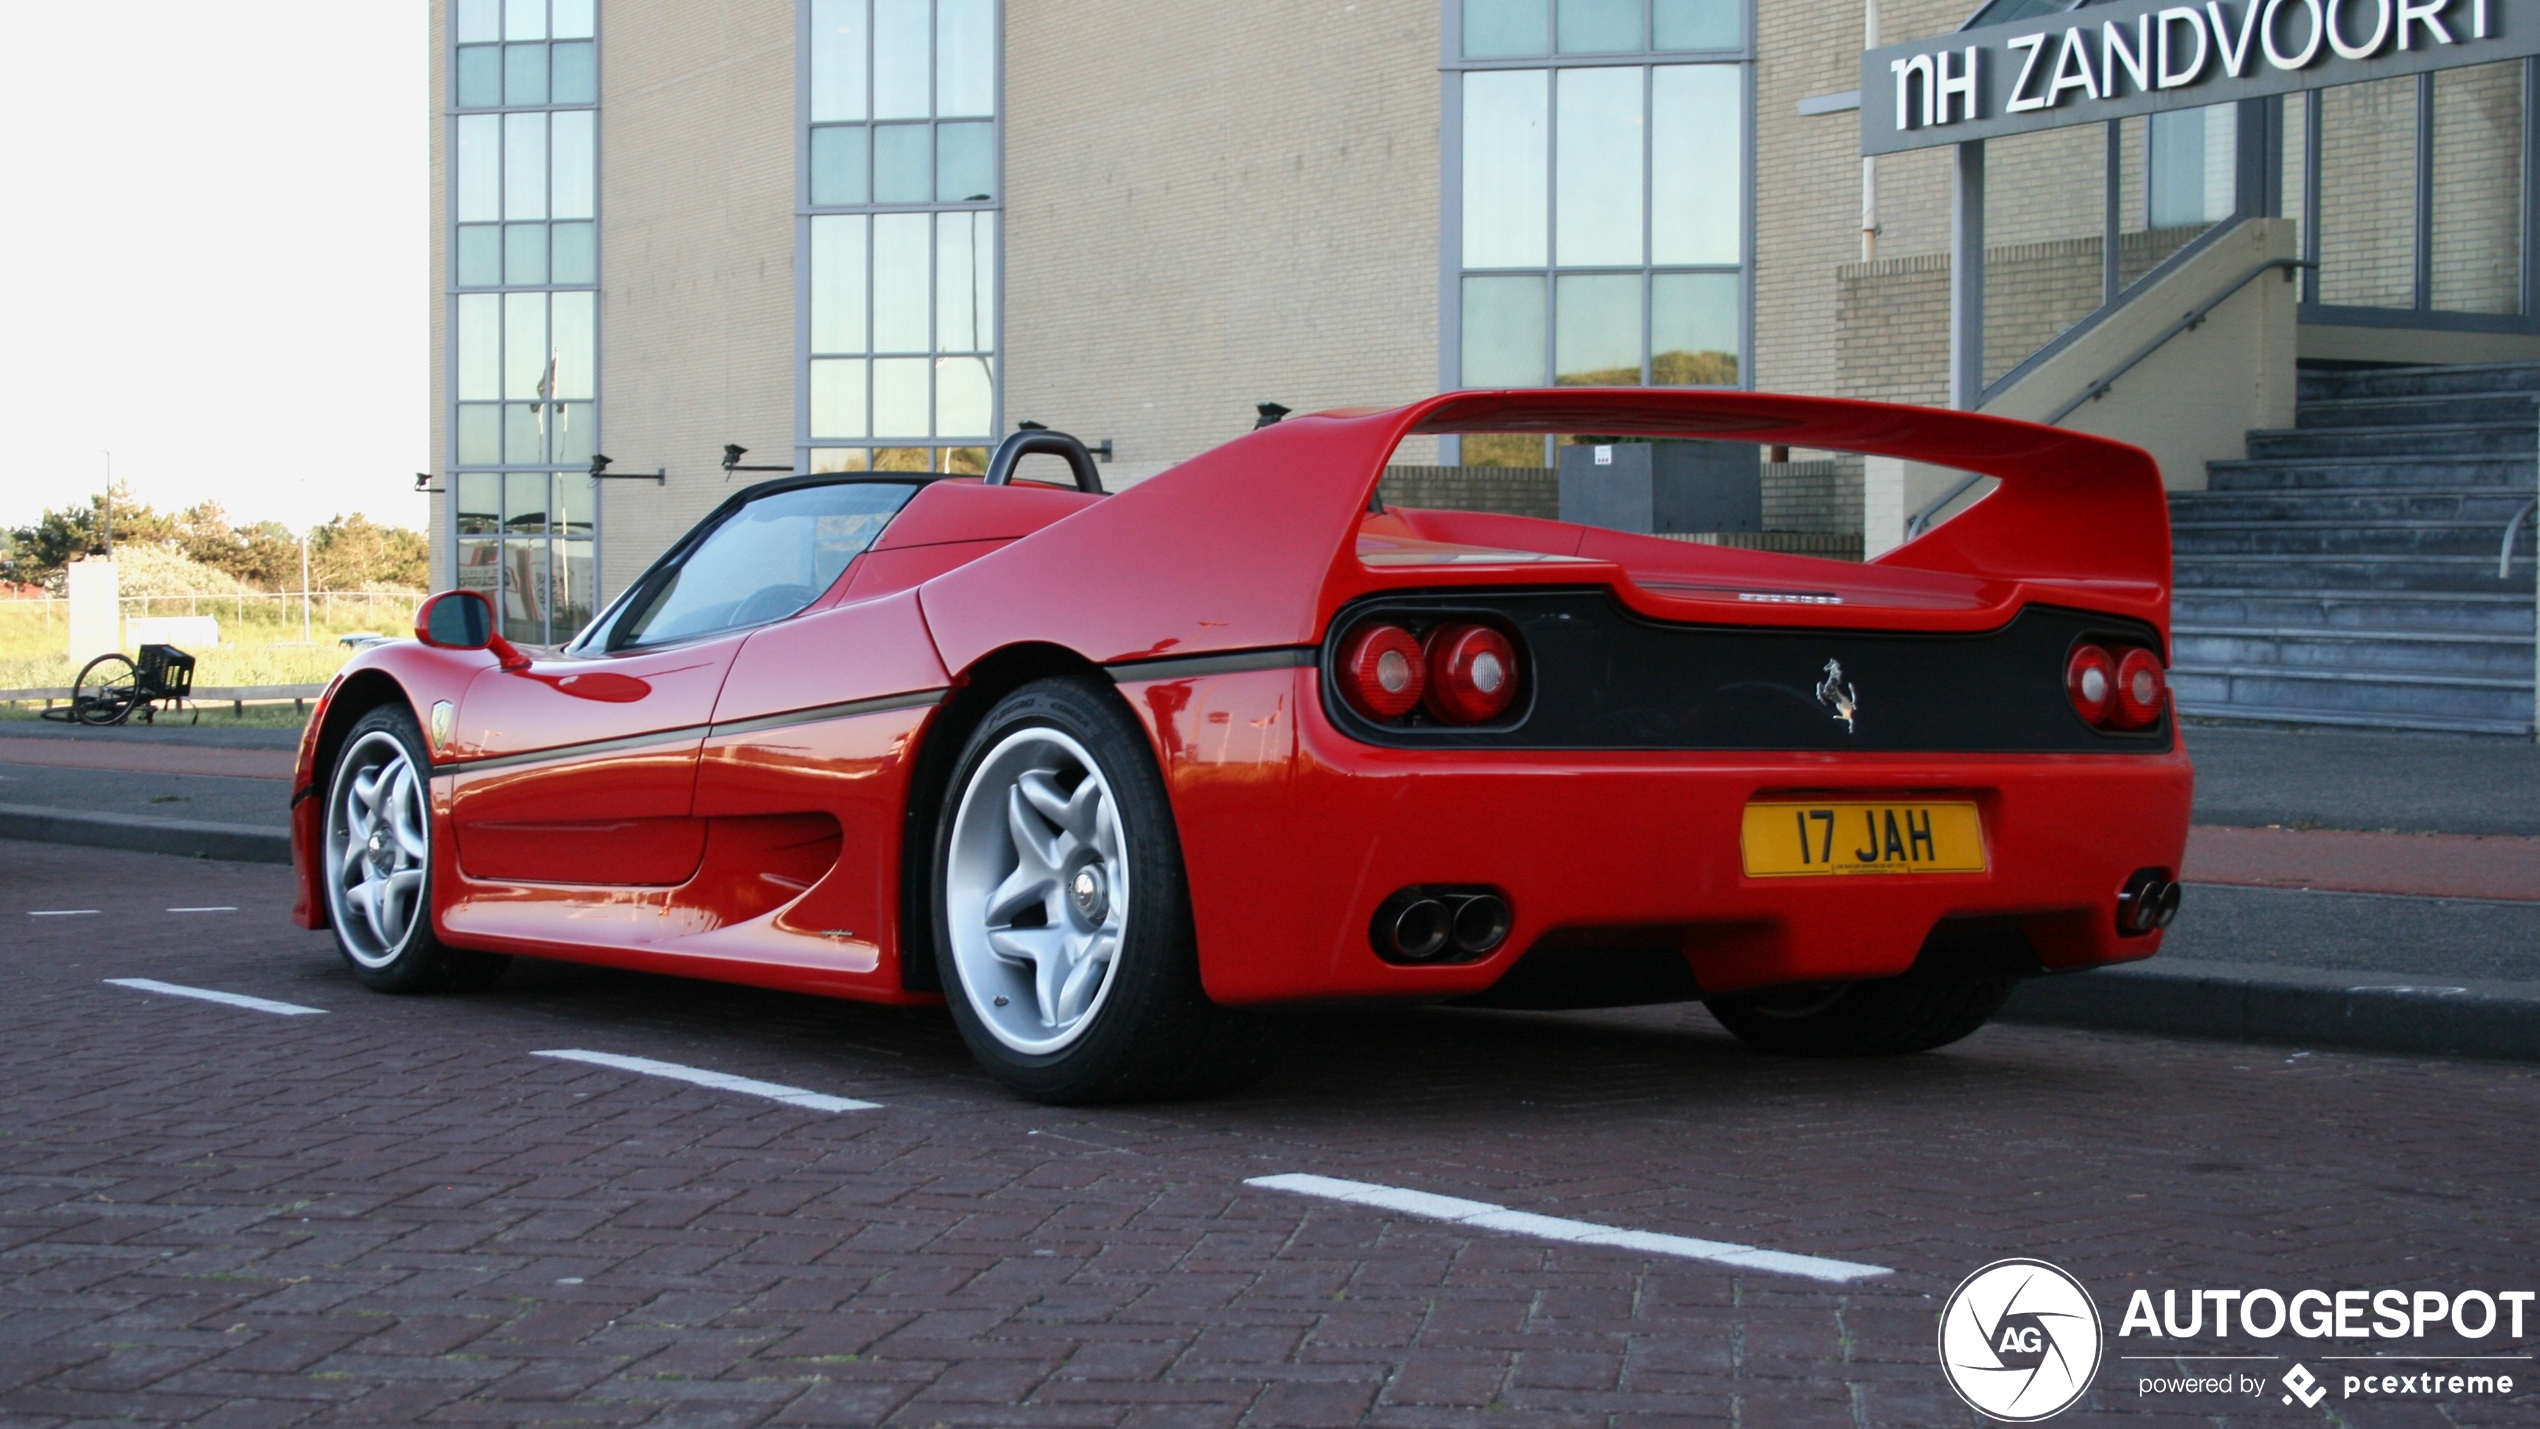 This F50 is a worthy anniversary spot